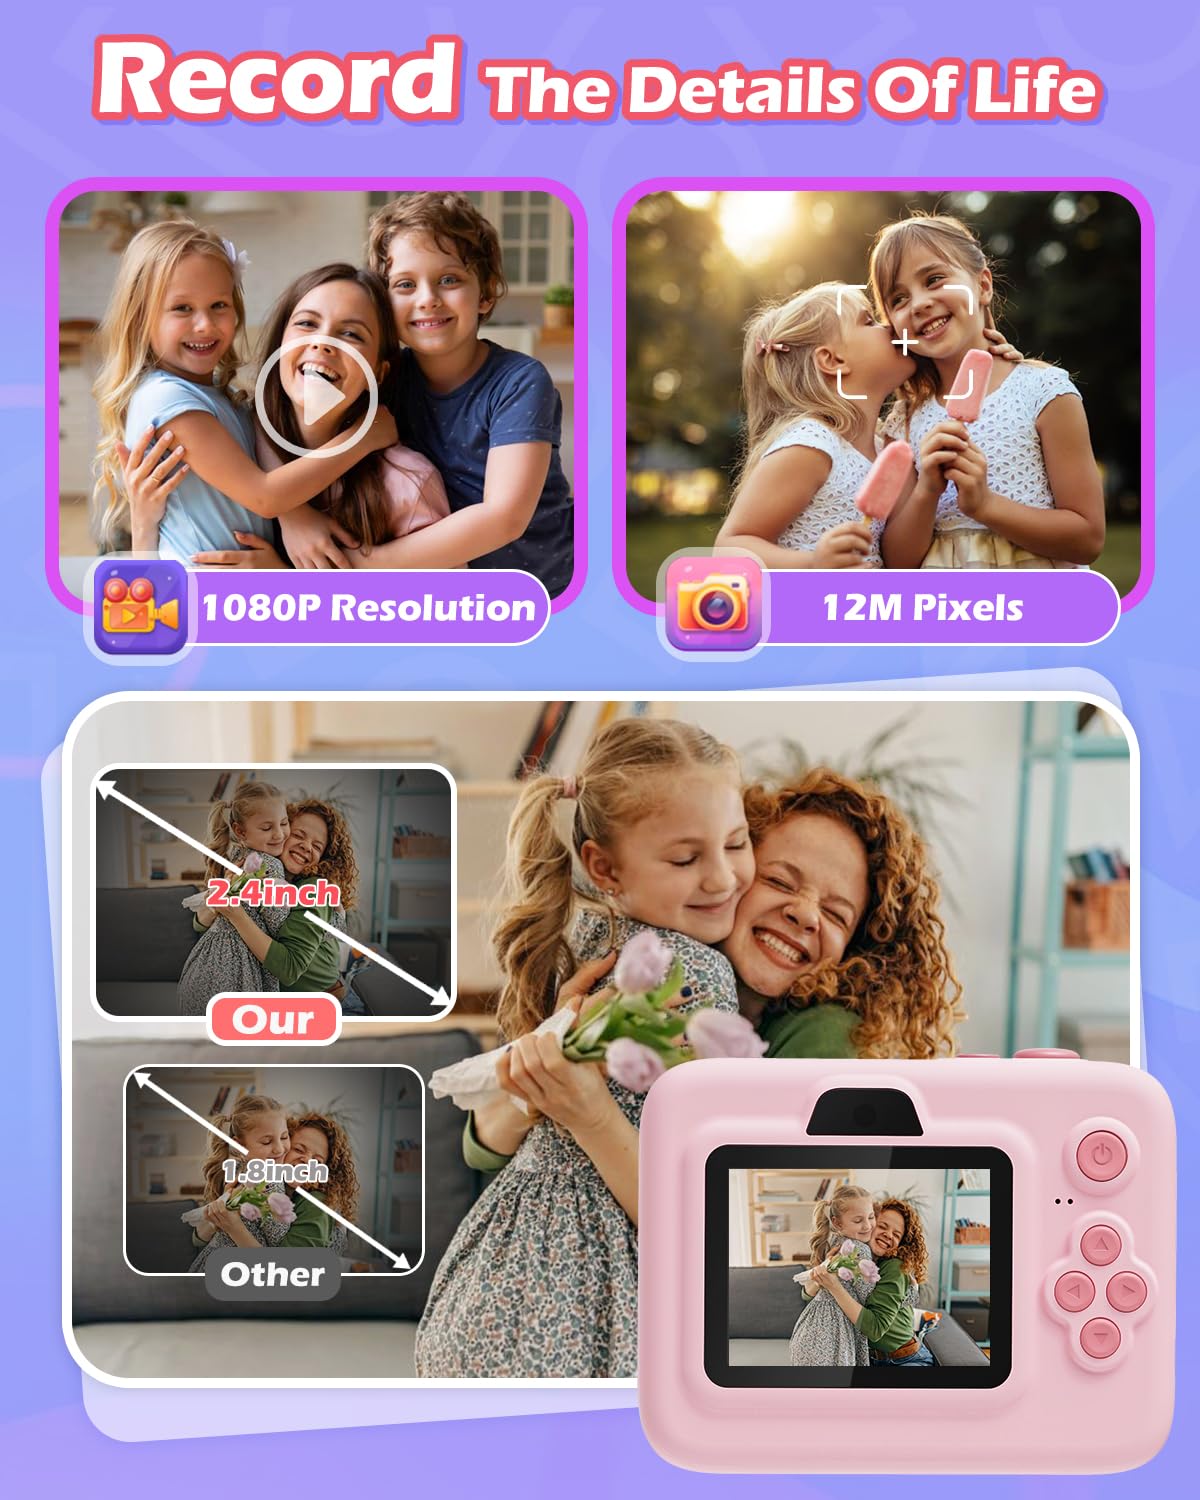 Anchioo Instant Print Camera for Kids, 2.4 Inch Screen Camera with 3 Print Paper, Birthday Gift for Girls Boys Age 3-12, 1080P Instant Camera Toys for 3 4 5 6 7 8 Year Old - Pink